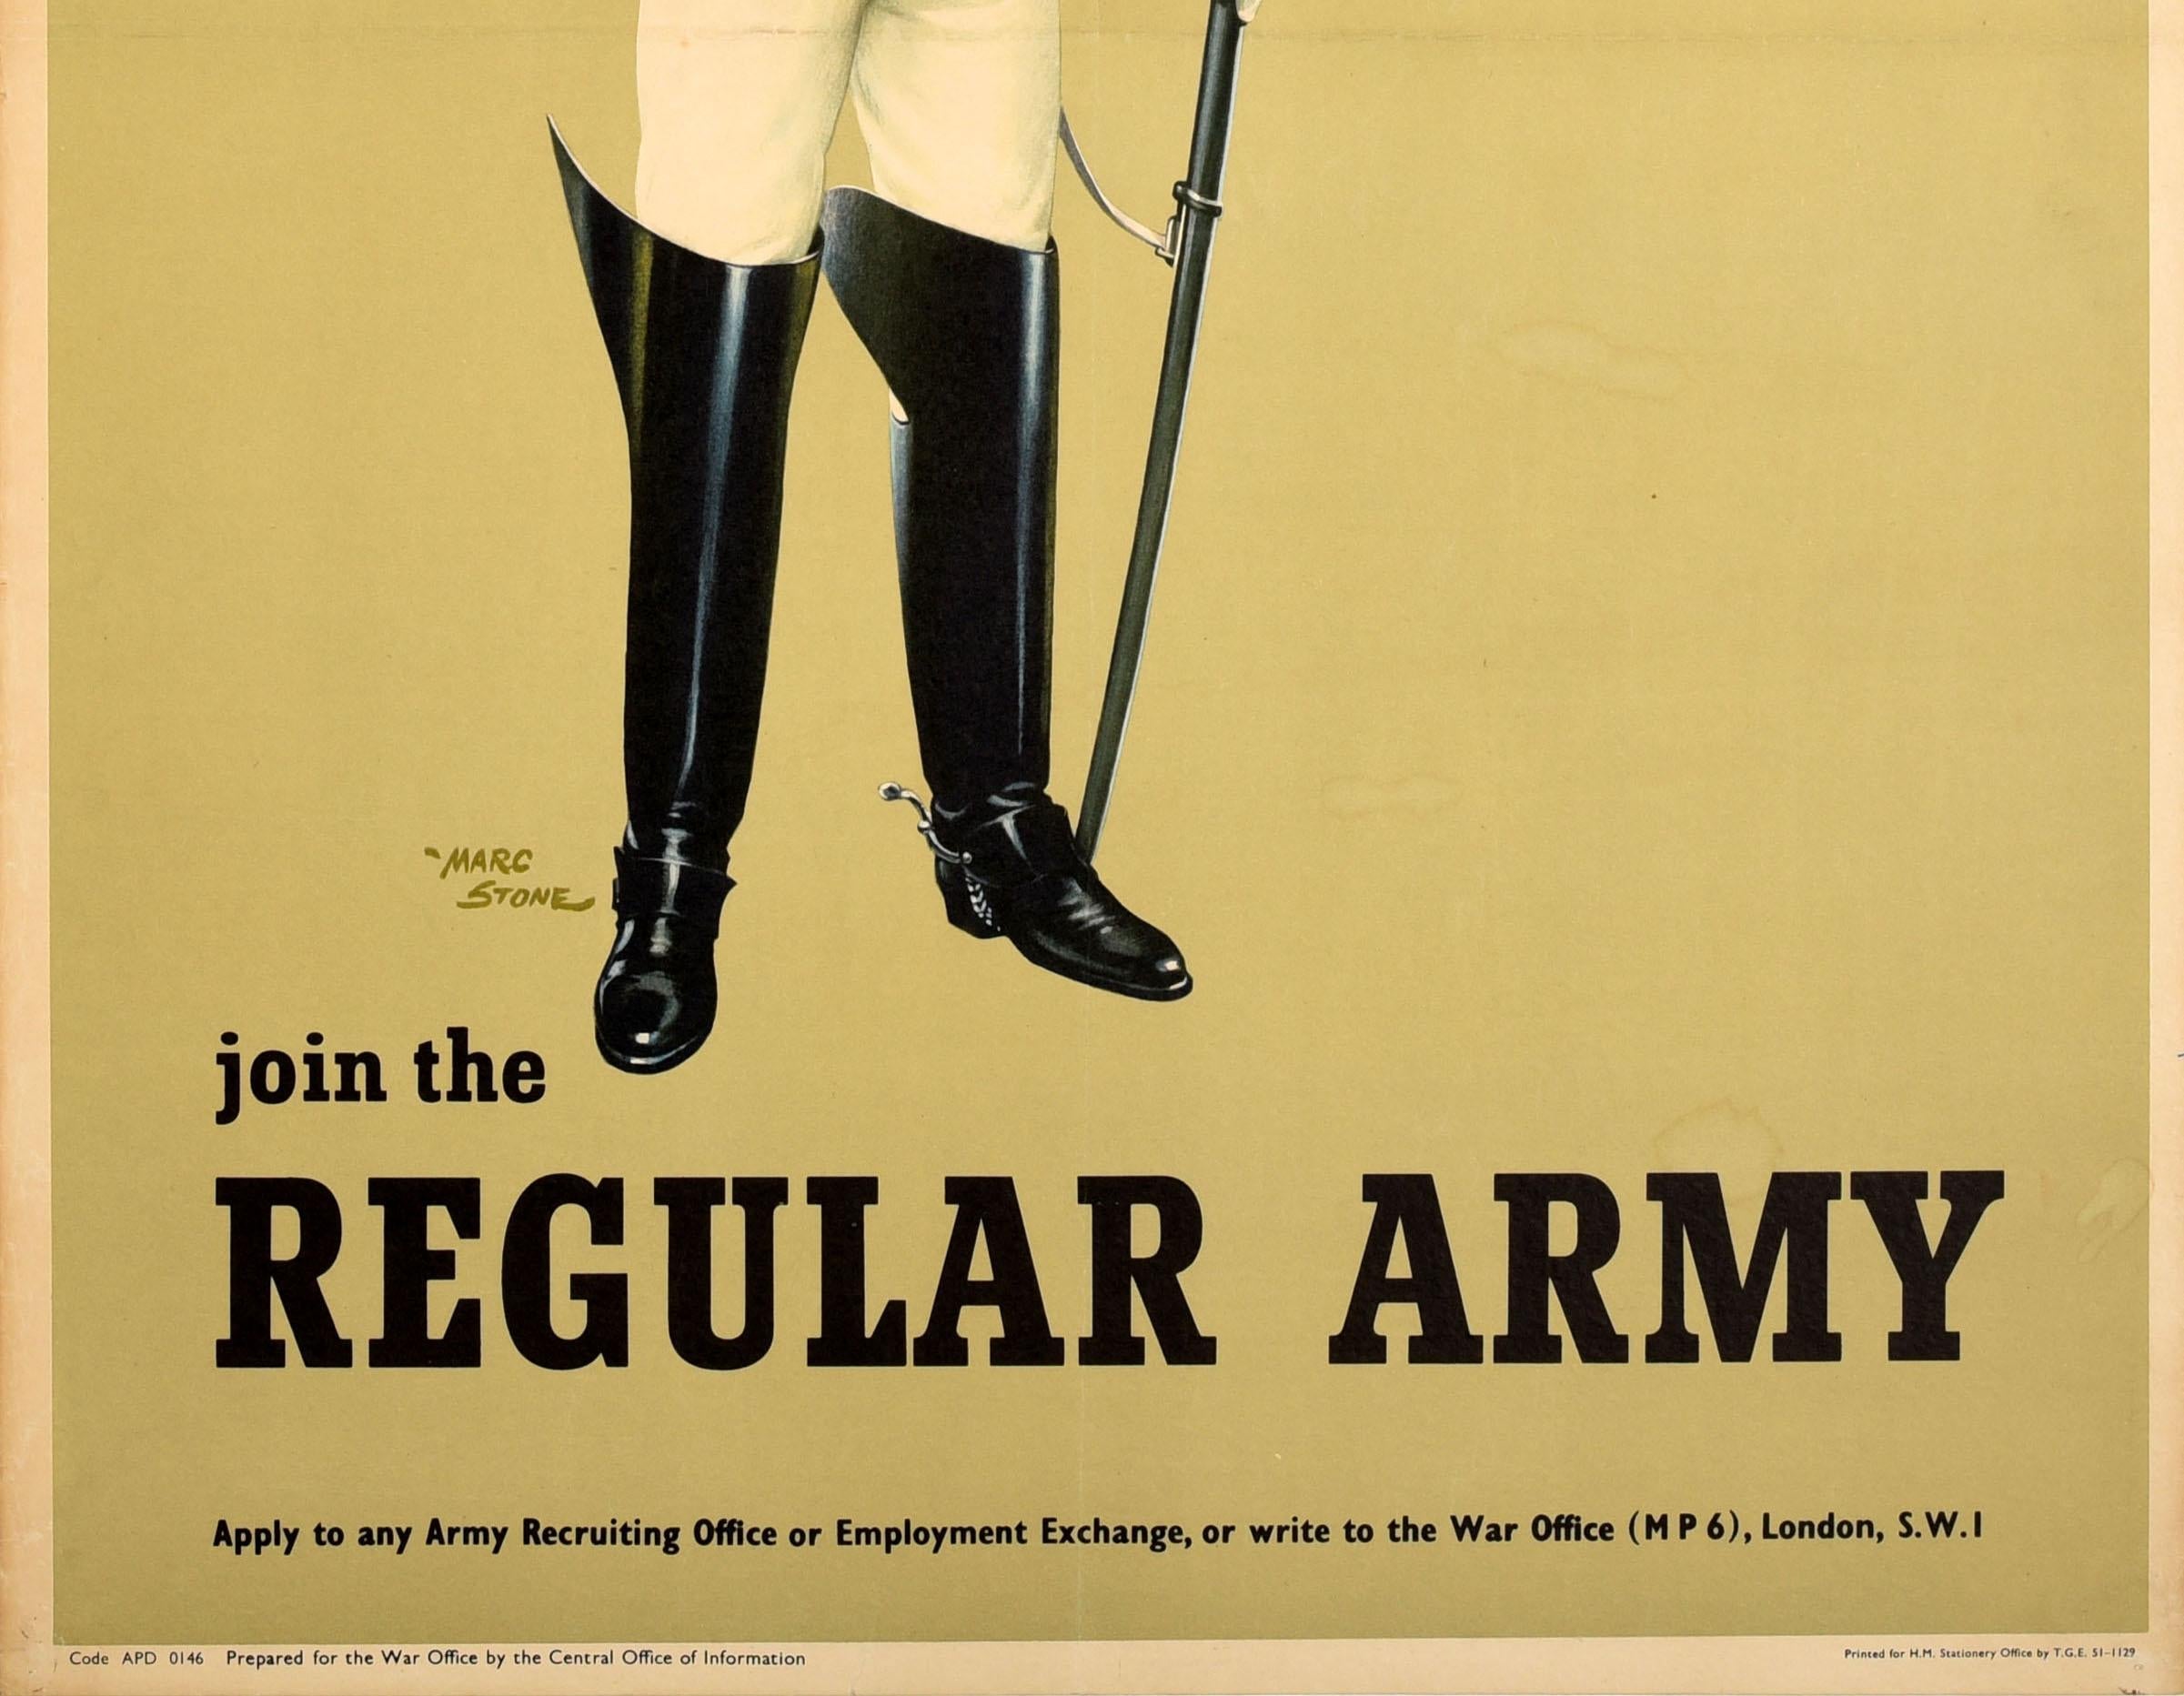 Original vintage British Army recruitment poster - Join the Regular Army It's a Real Man's Life - featuring a stunning image by the British artist Marcus Stone (1909-1991) of a royal Life Guard in full dress uniform with a metal cuirass, long black